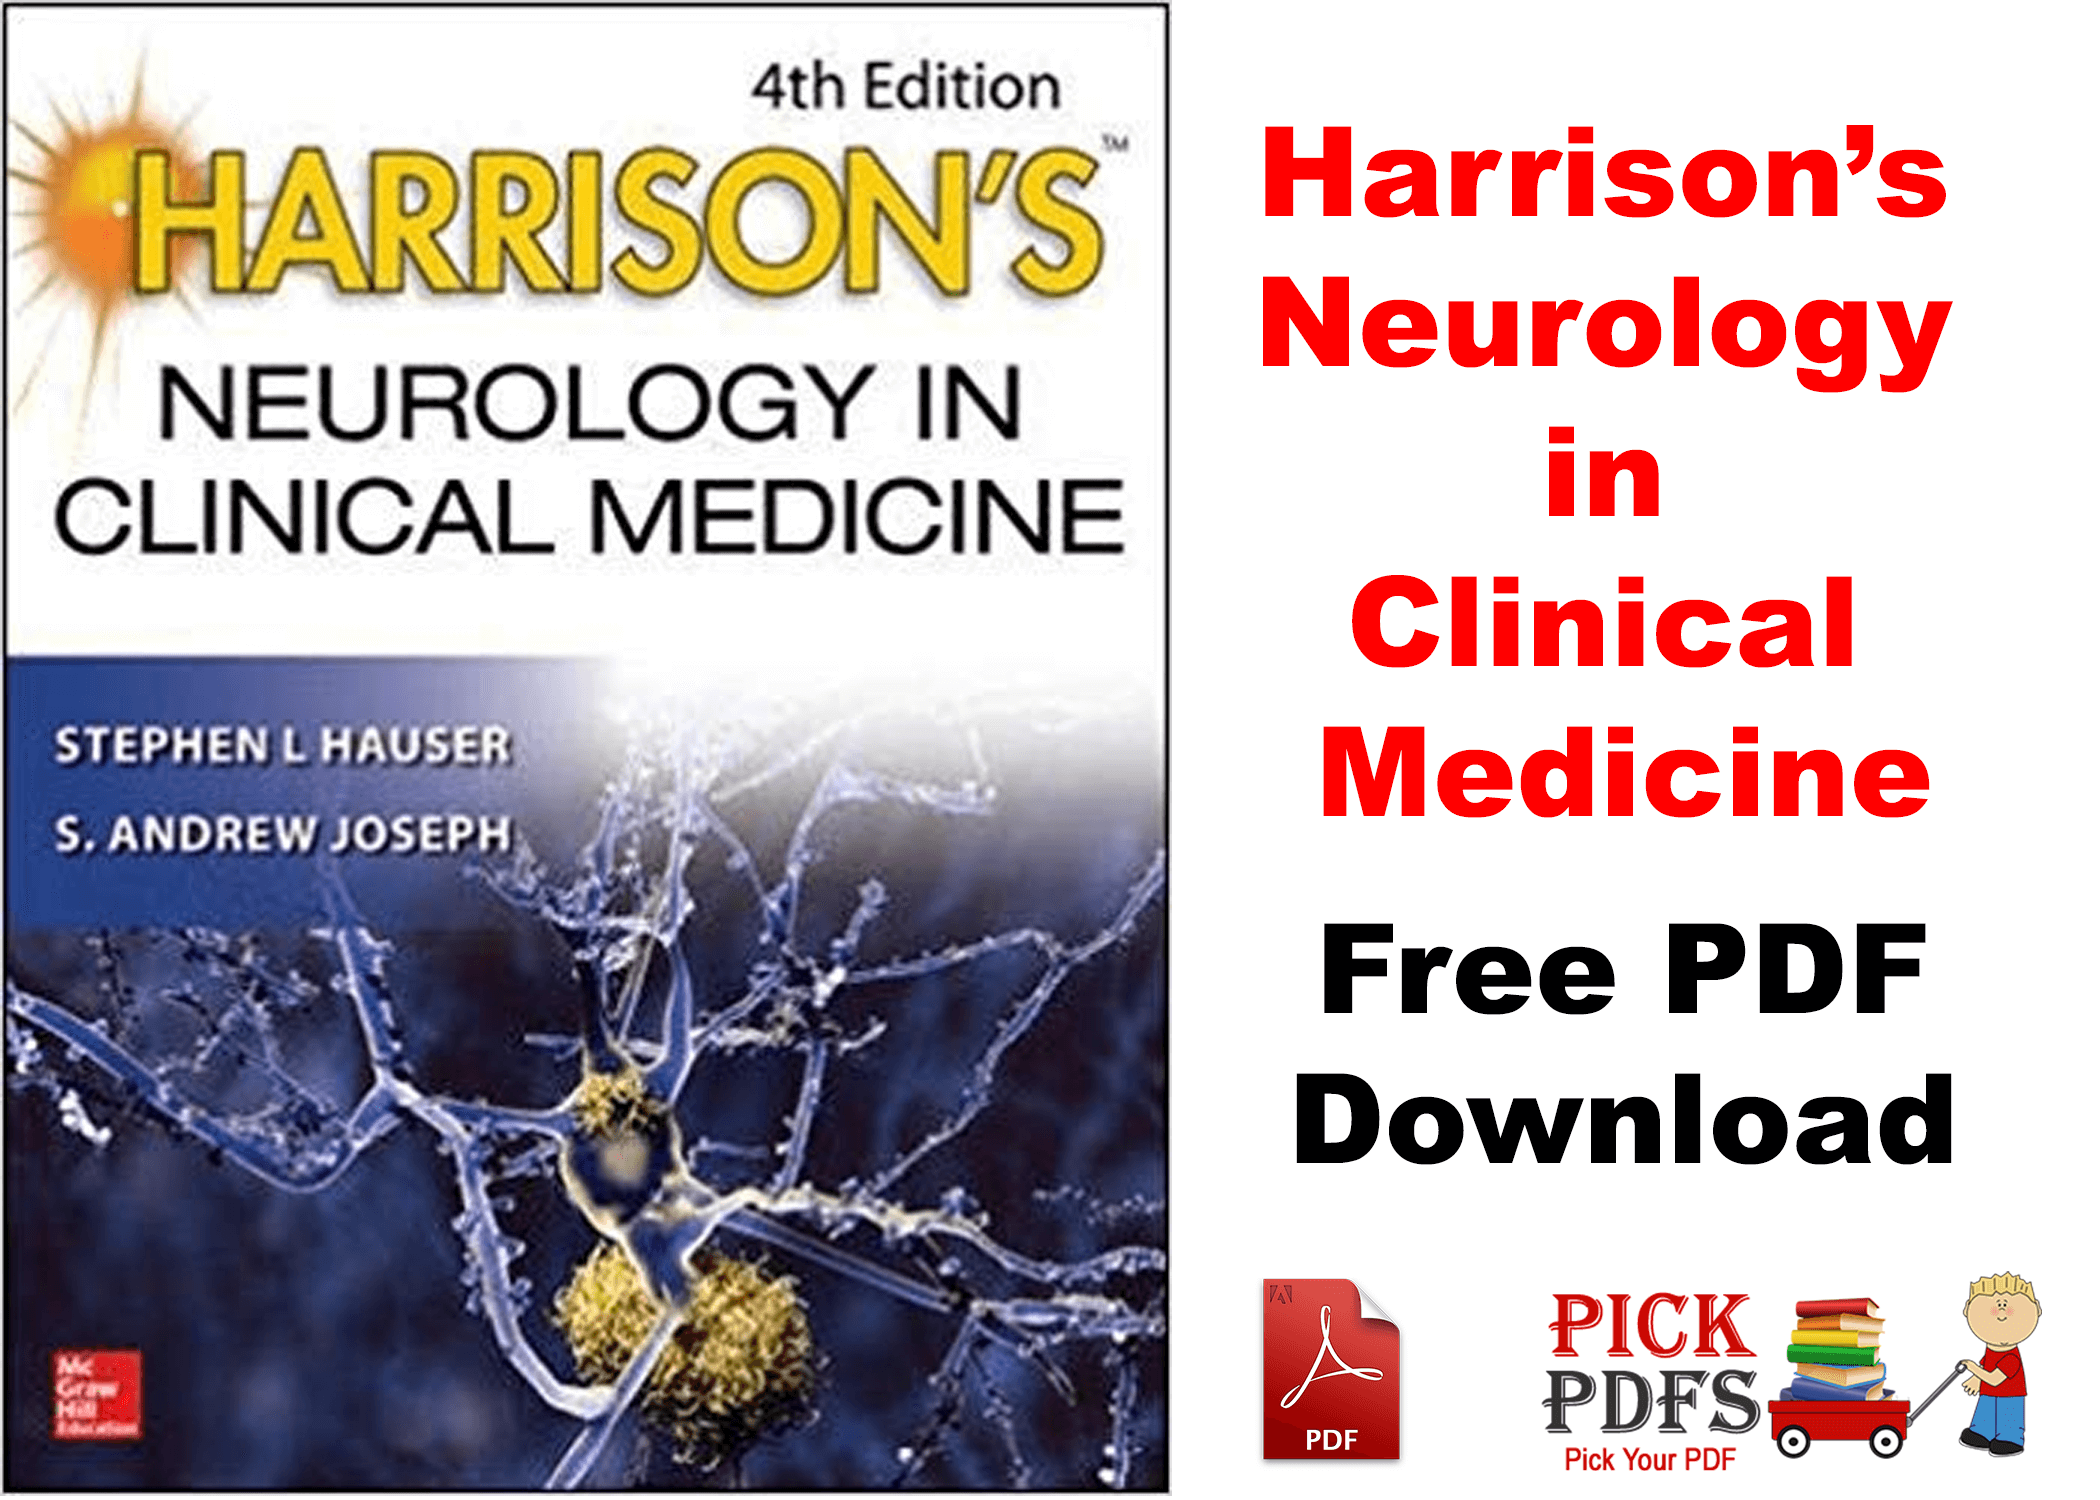 https://pickpdfs.com/download-imaging-of-cerebrovascular-disease-a-practical-guide-pdf-free2021/